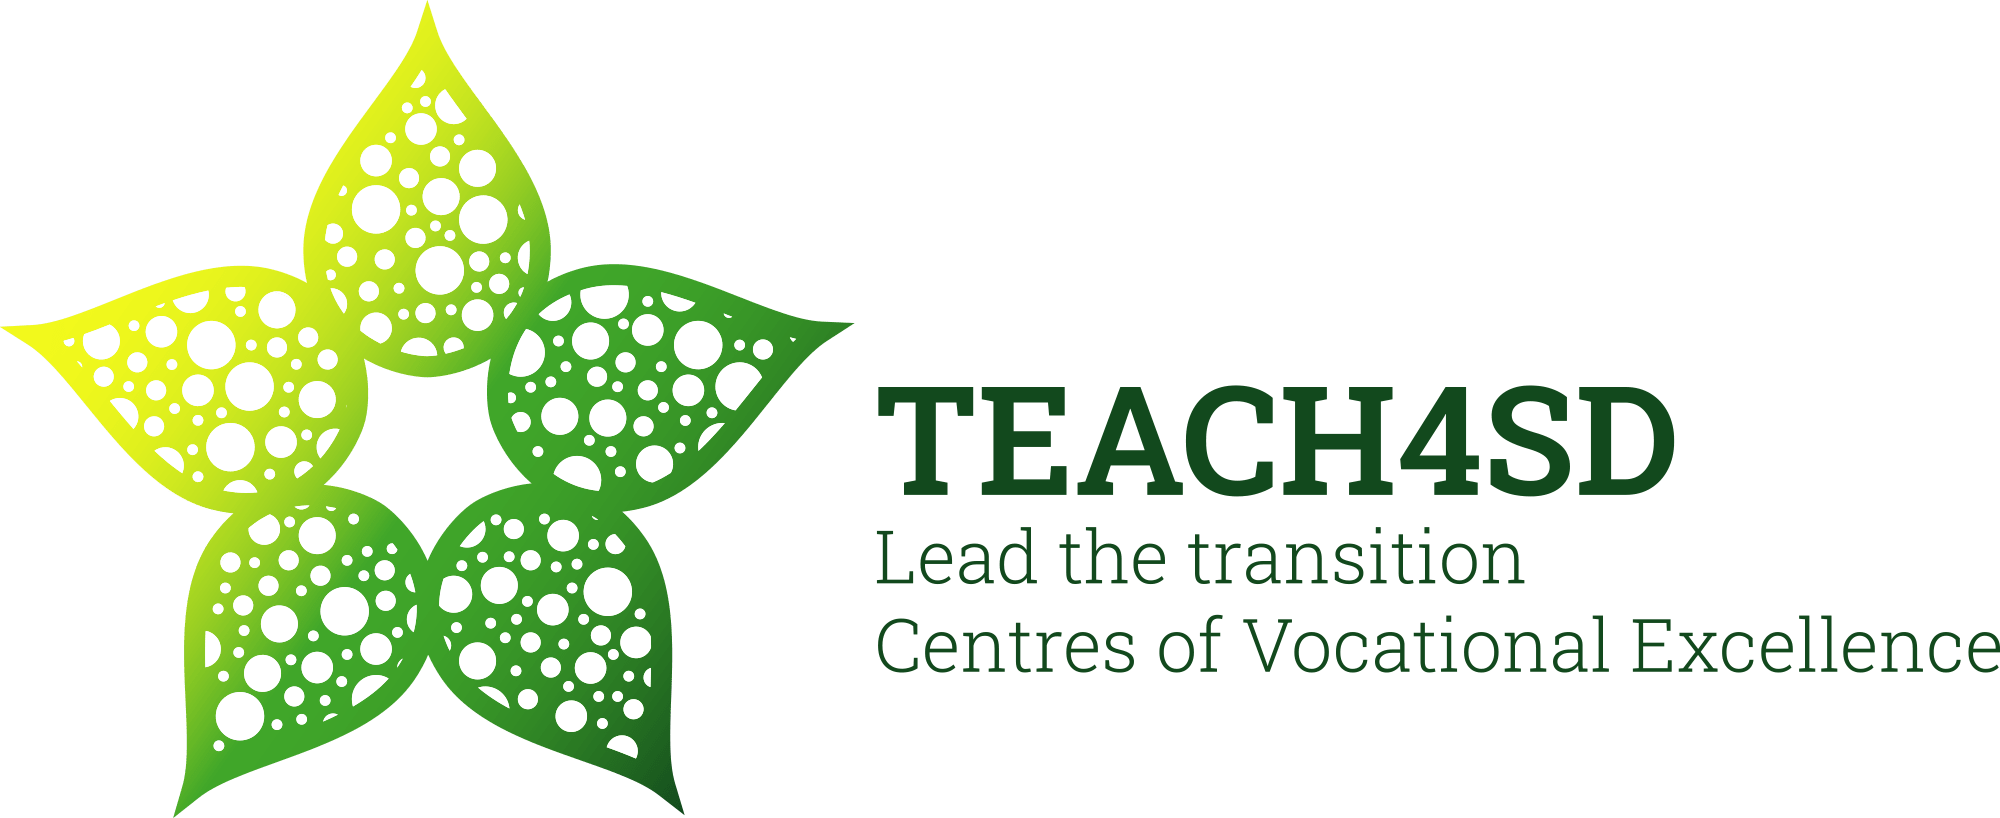 Teach4SD - Lead the transition - Centres of Vocational Excellence